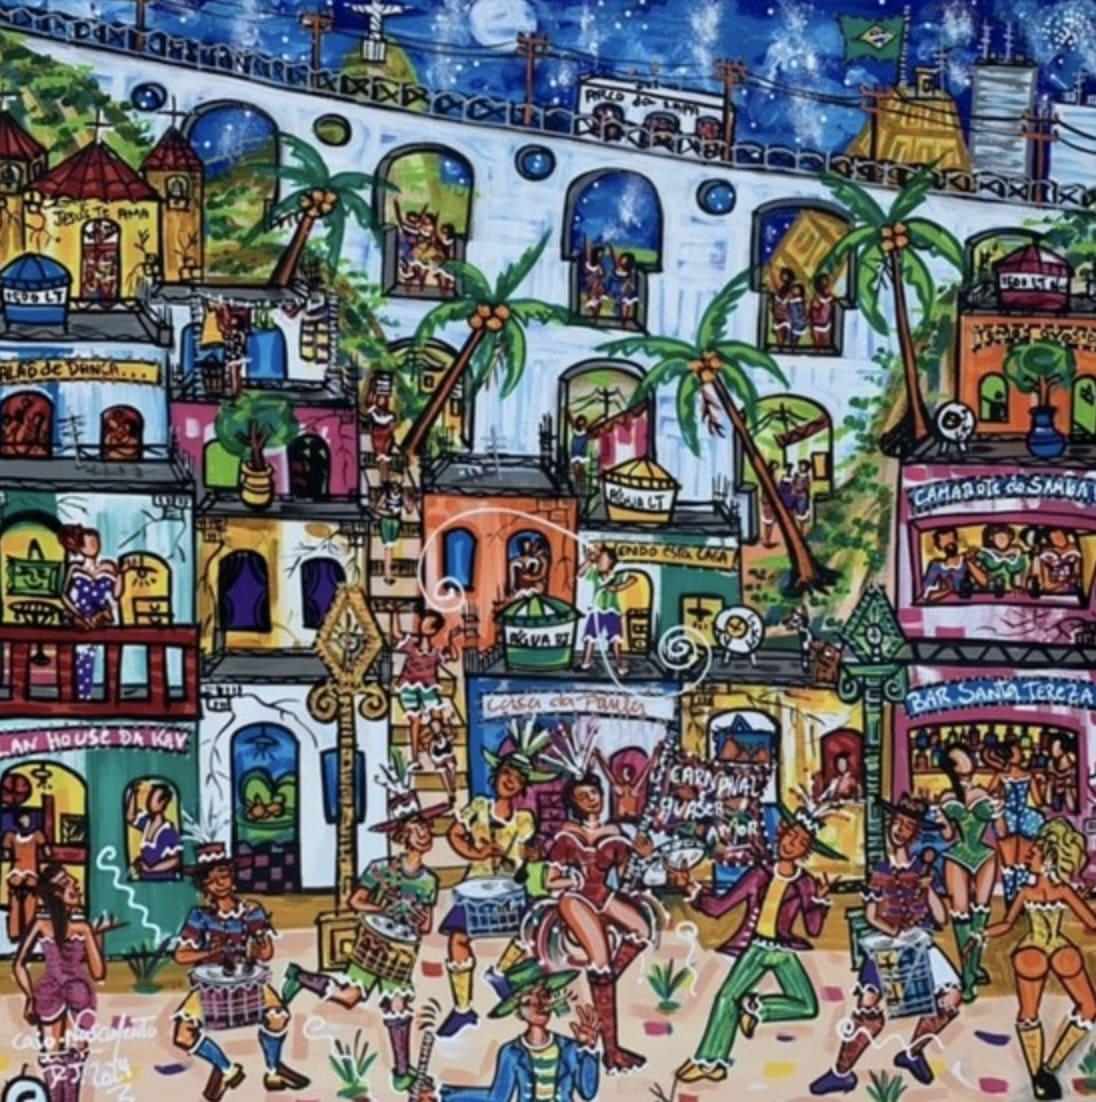 "Carnival Block in Arcos da Lap" captures the vibrant essence of Brazilian culture against the backdrop of a bustling favela. In the foreground, rows of colorful buildings line the streets, pulsating with the energy of the carnival celebration. The